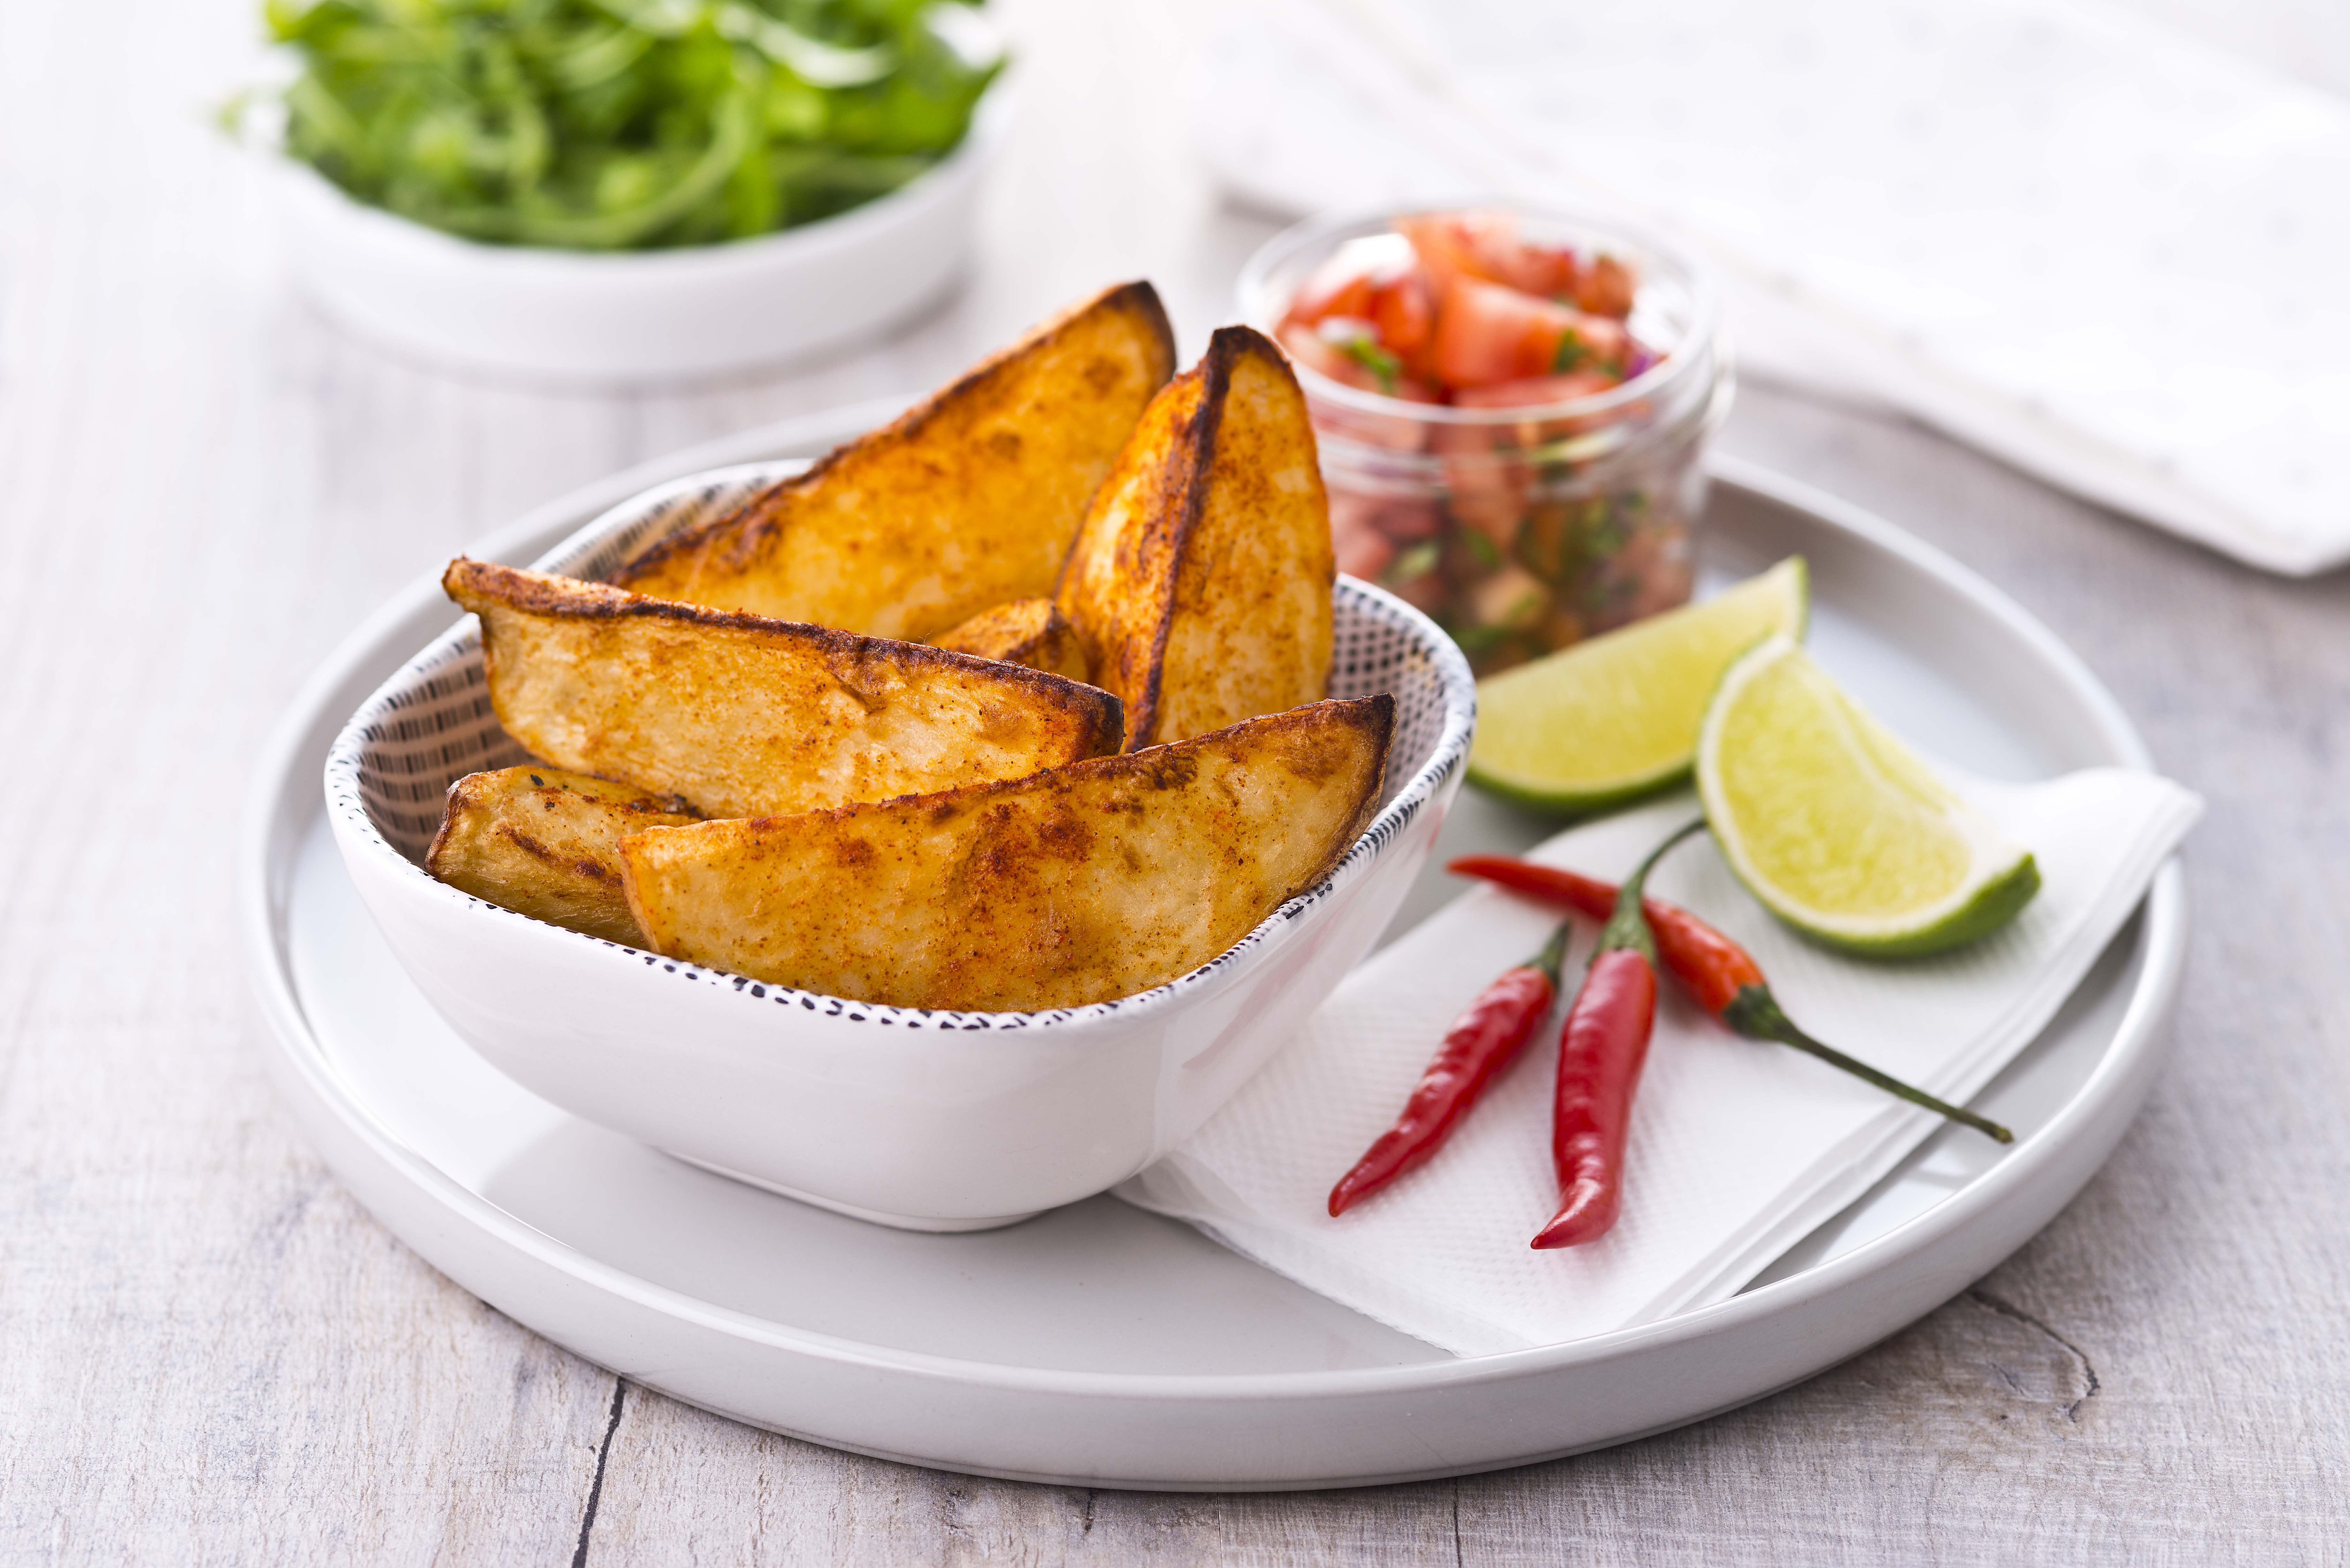 Potato wedges served with a slice of lime